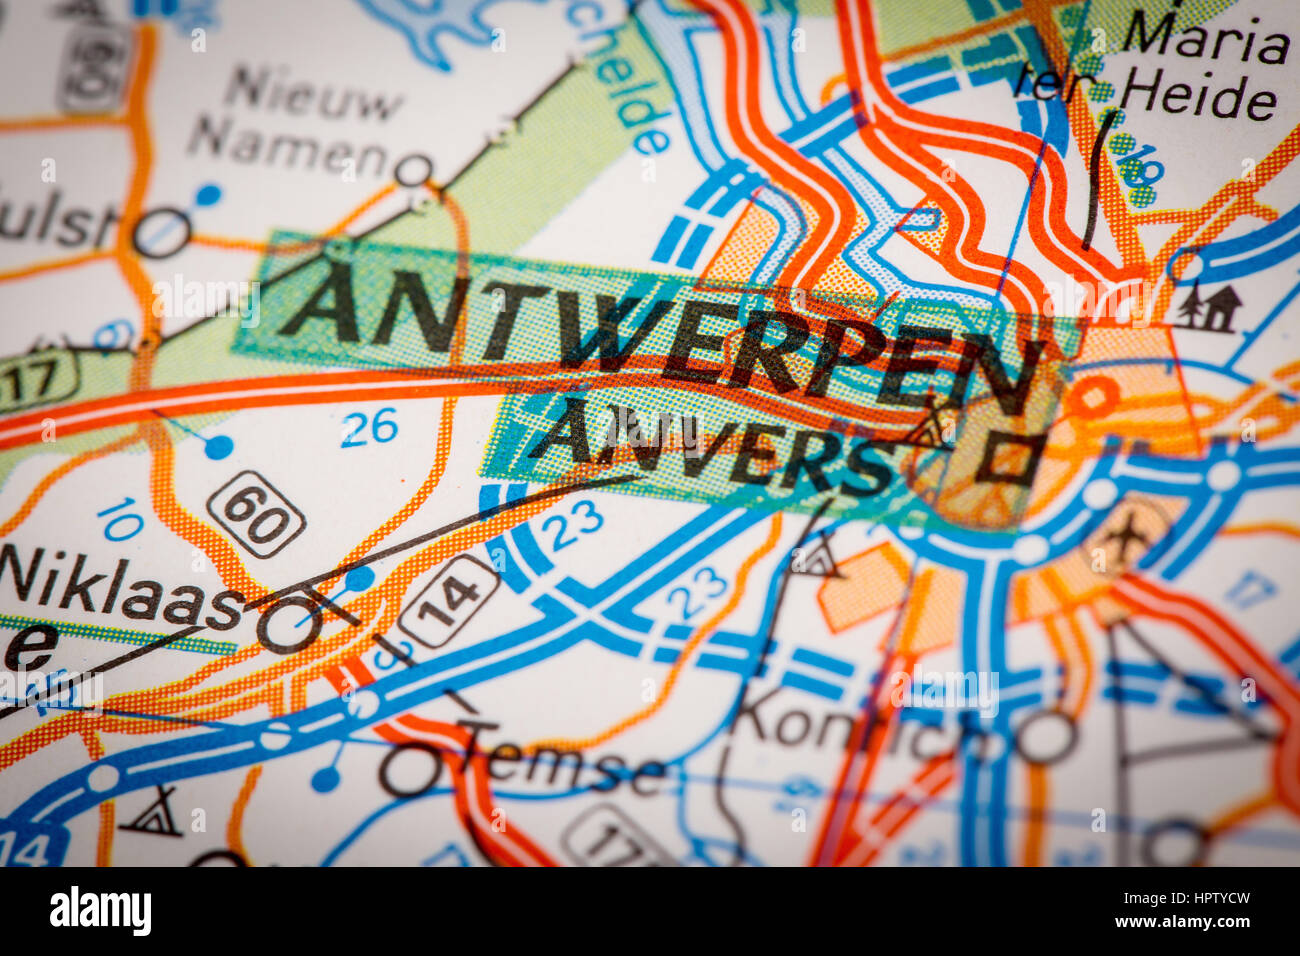 Map Photography: Antwerpen City on a Road Map Stock Photo